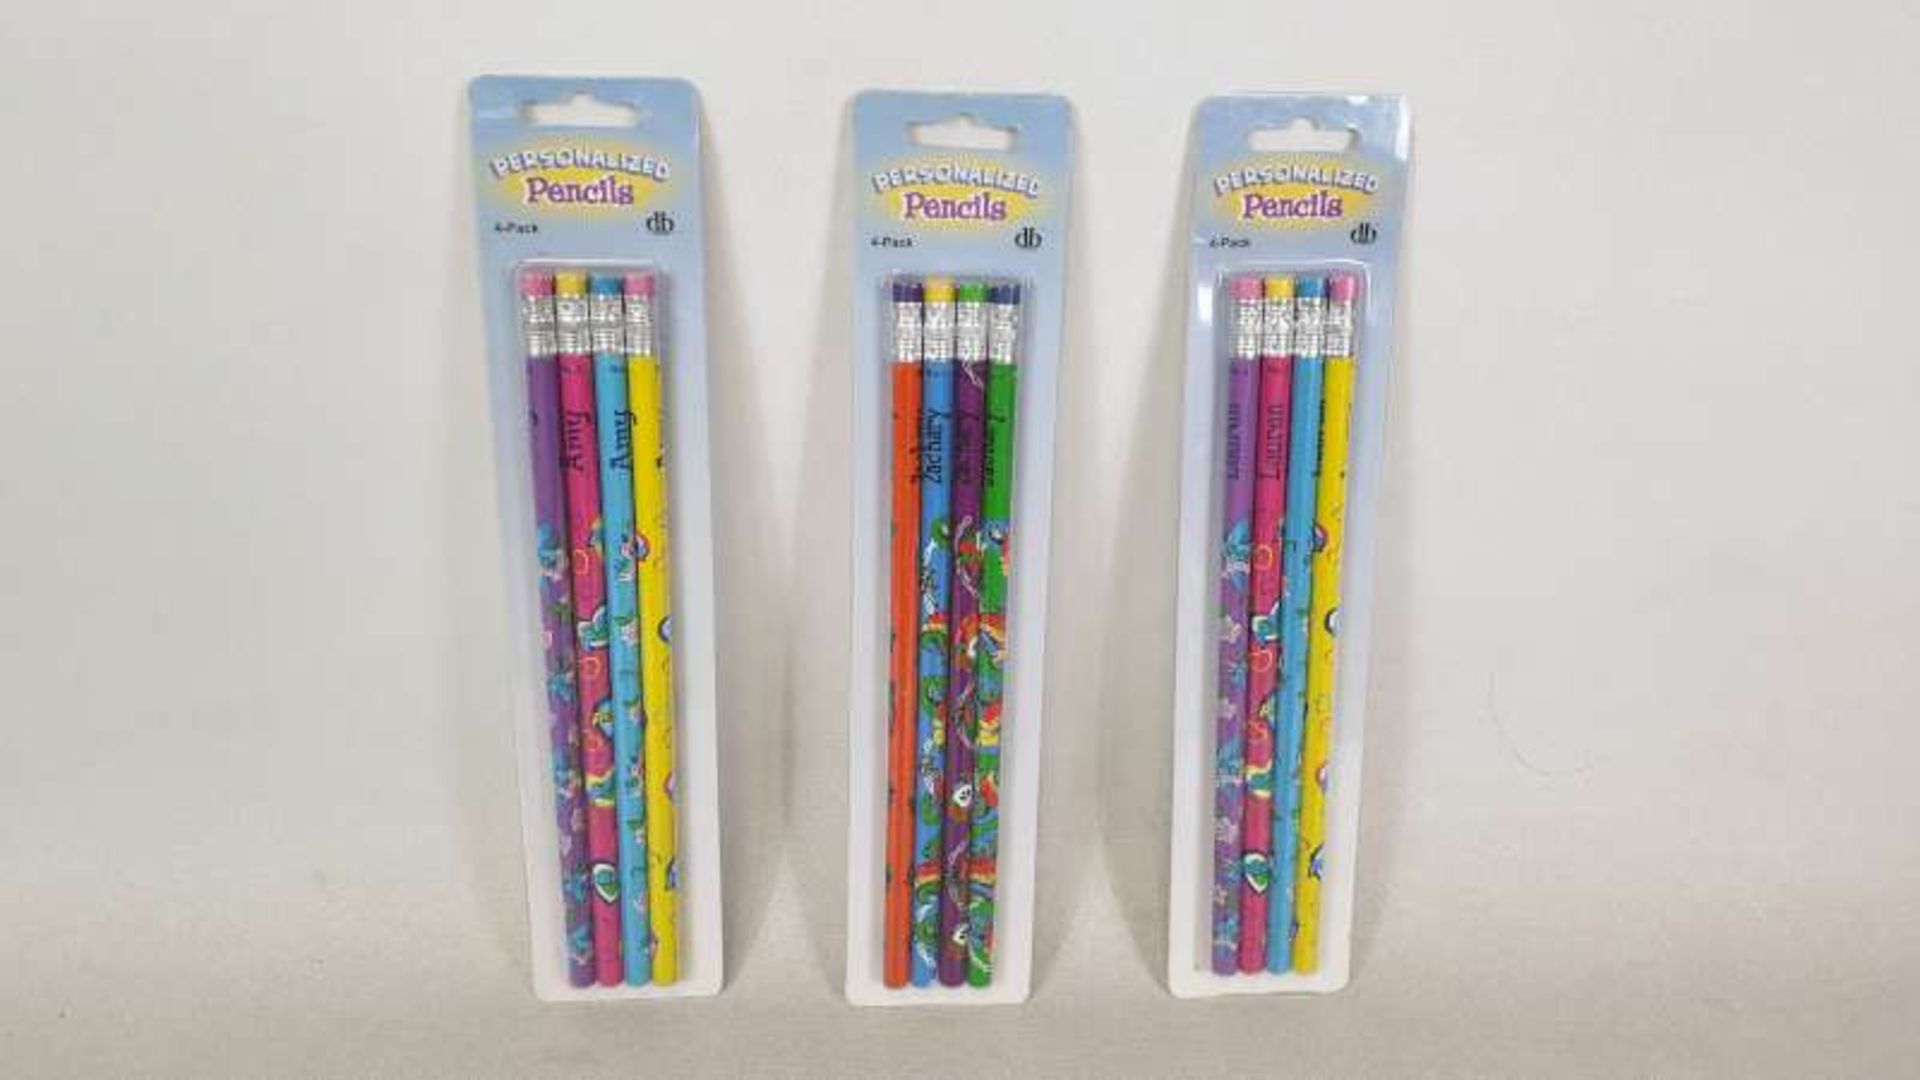 700 X PACKS OF 4 PERSONALIZED PENCILS IN VARIOUS NAMES IN 2 BOXES